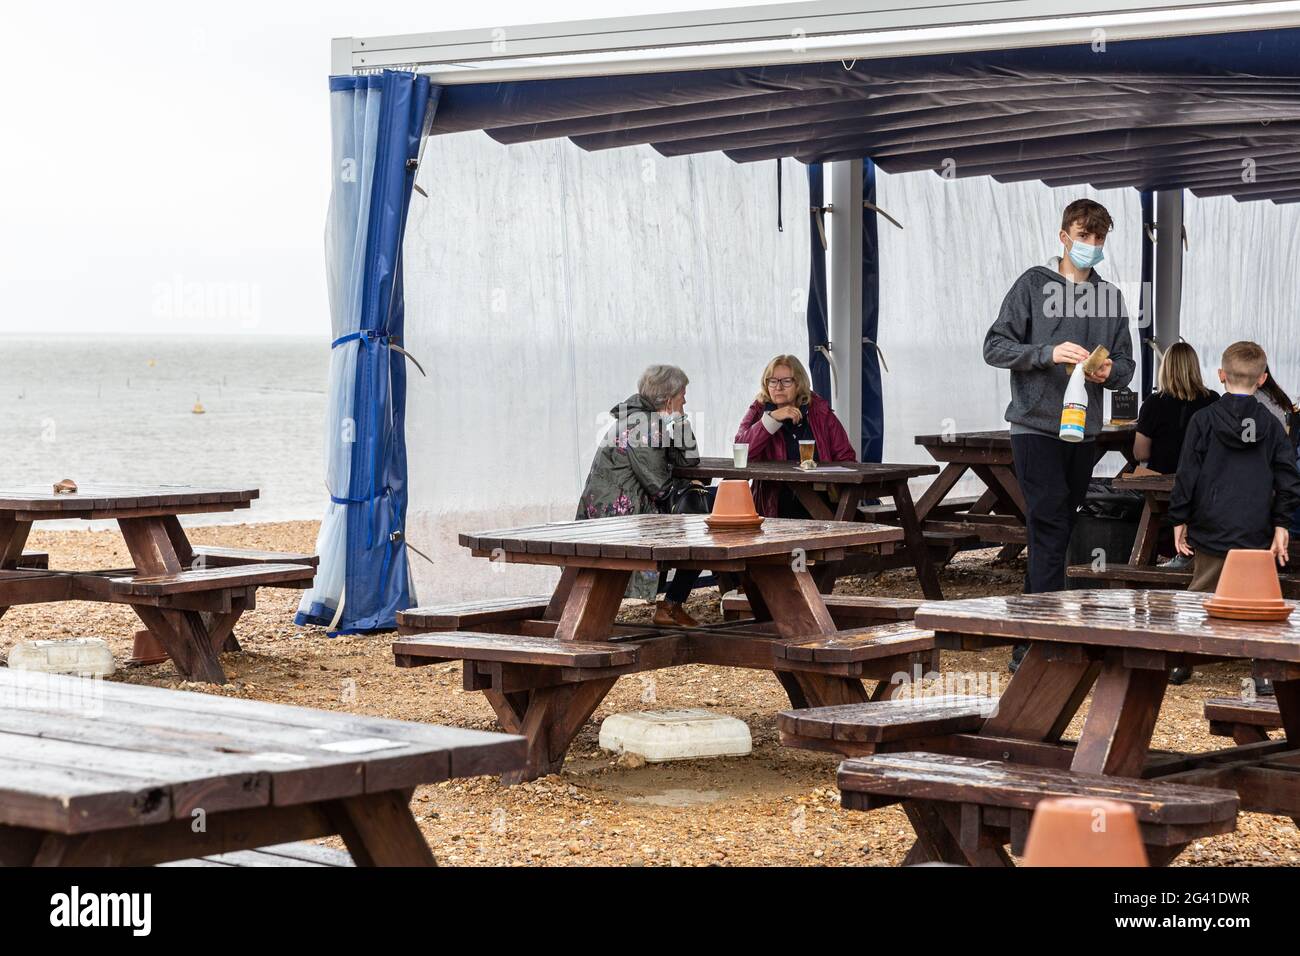 Whitstable, United Kingdom, June 18, 2021. People  sit in outdoor restaurant at the beach  in Whitstable, a coastal touristic town in south-eastern England as vary poor rainy weather disturb holidaymakers as the holiday season begins. One of the strictest Coronavirus lockdowns in the world  is partially lifted as the United Kingdom managed to vaccinate a large part of the population and the number of Covid cases is low. People are able to socialize in limited numbers and are able to book holidays. Stock Photo